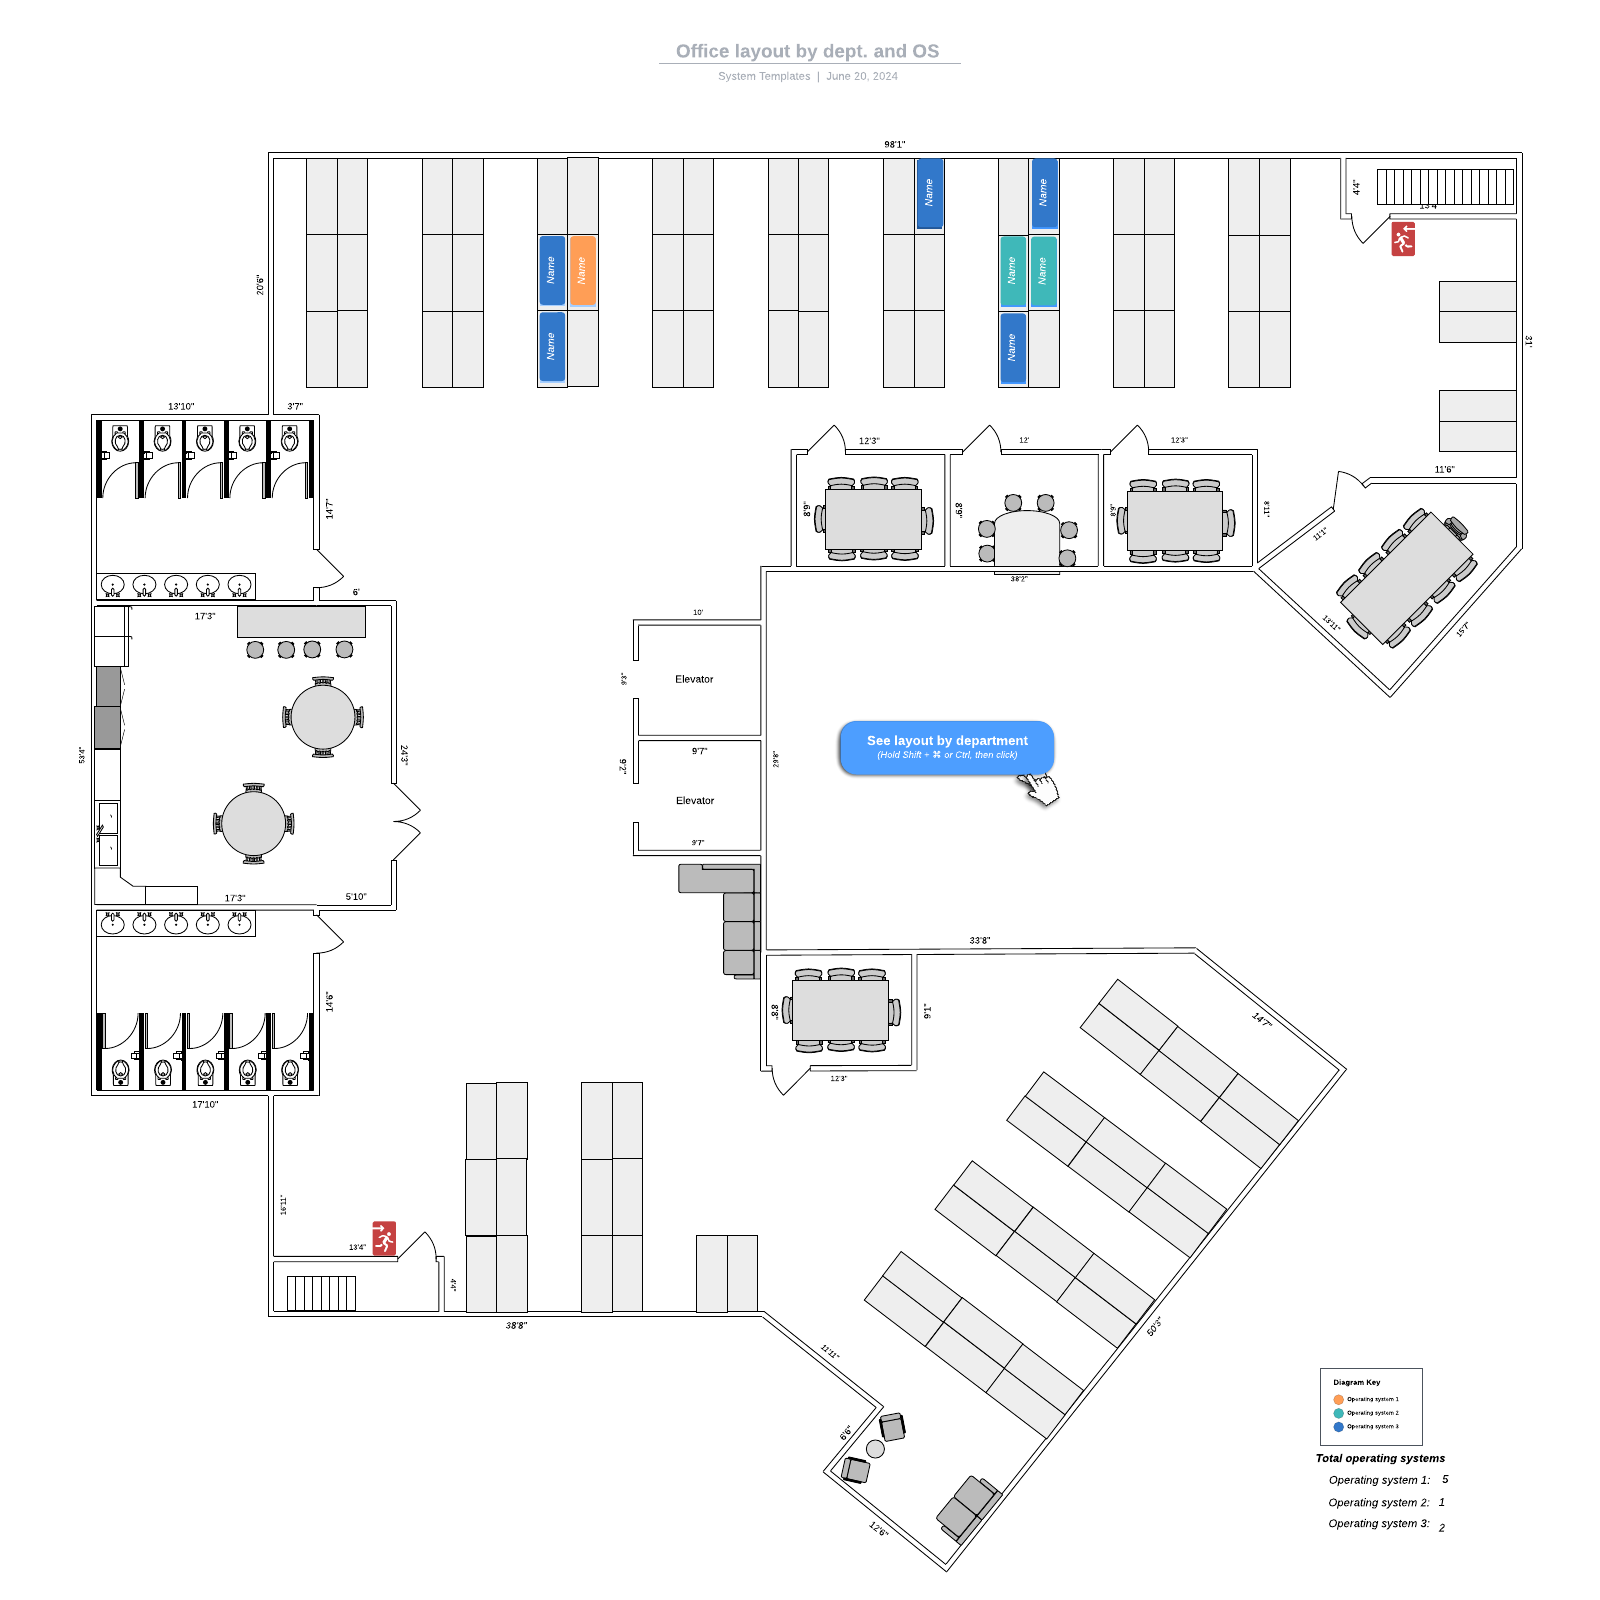 Office layout by dept. and OS example